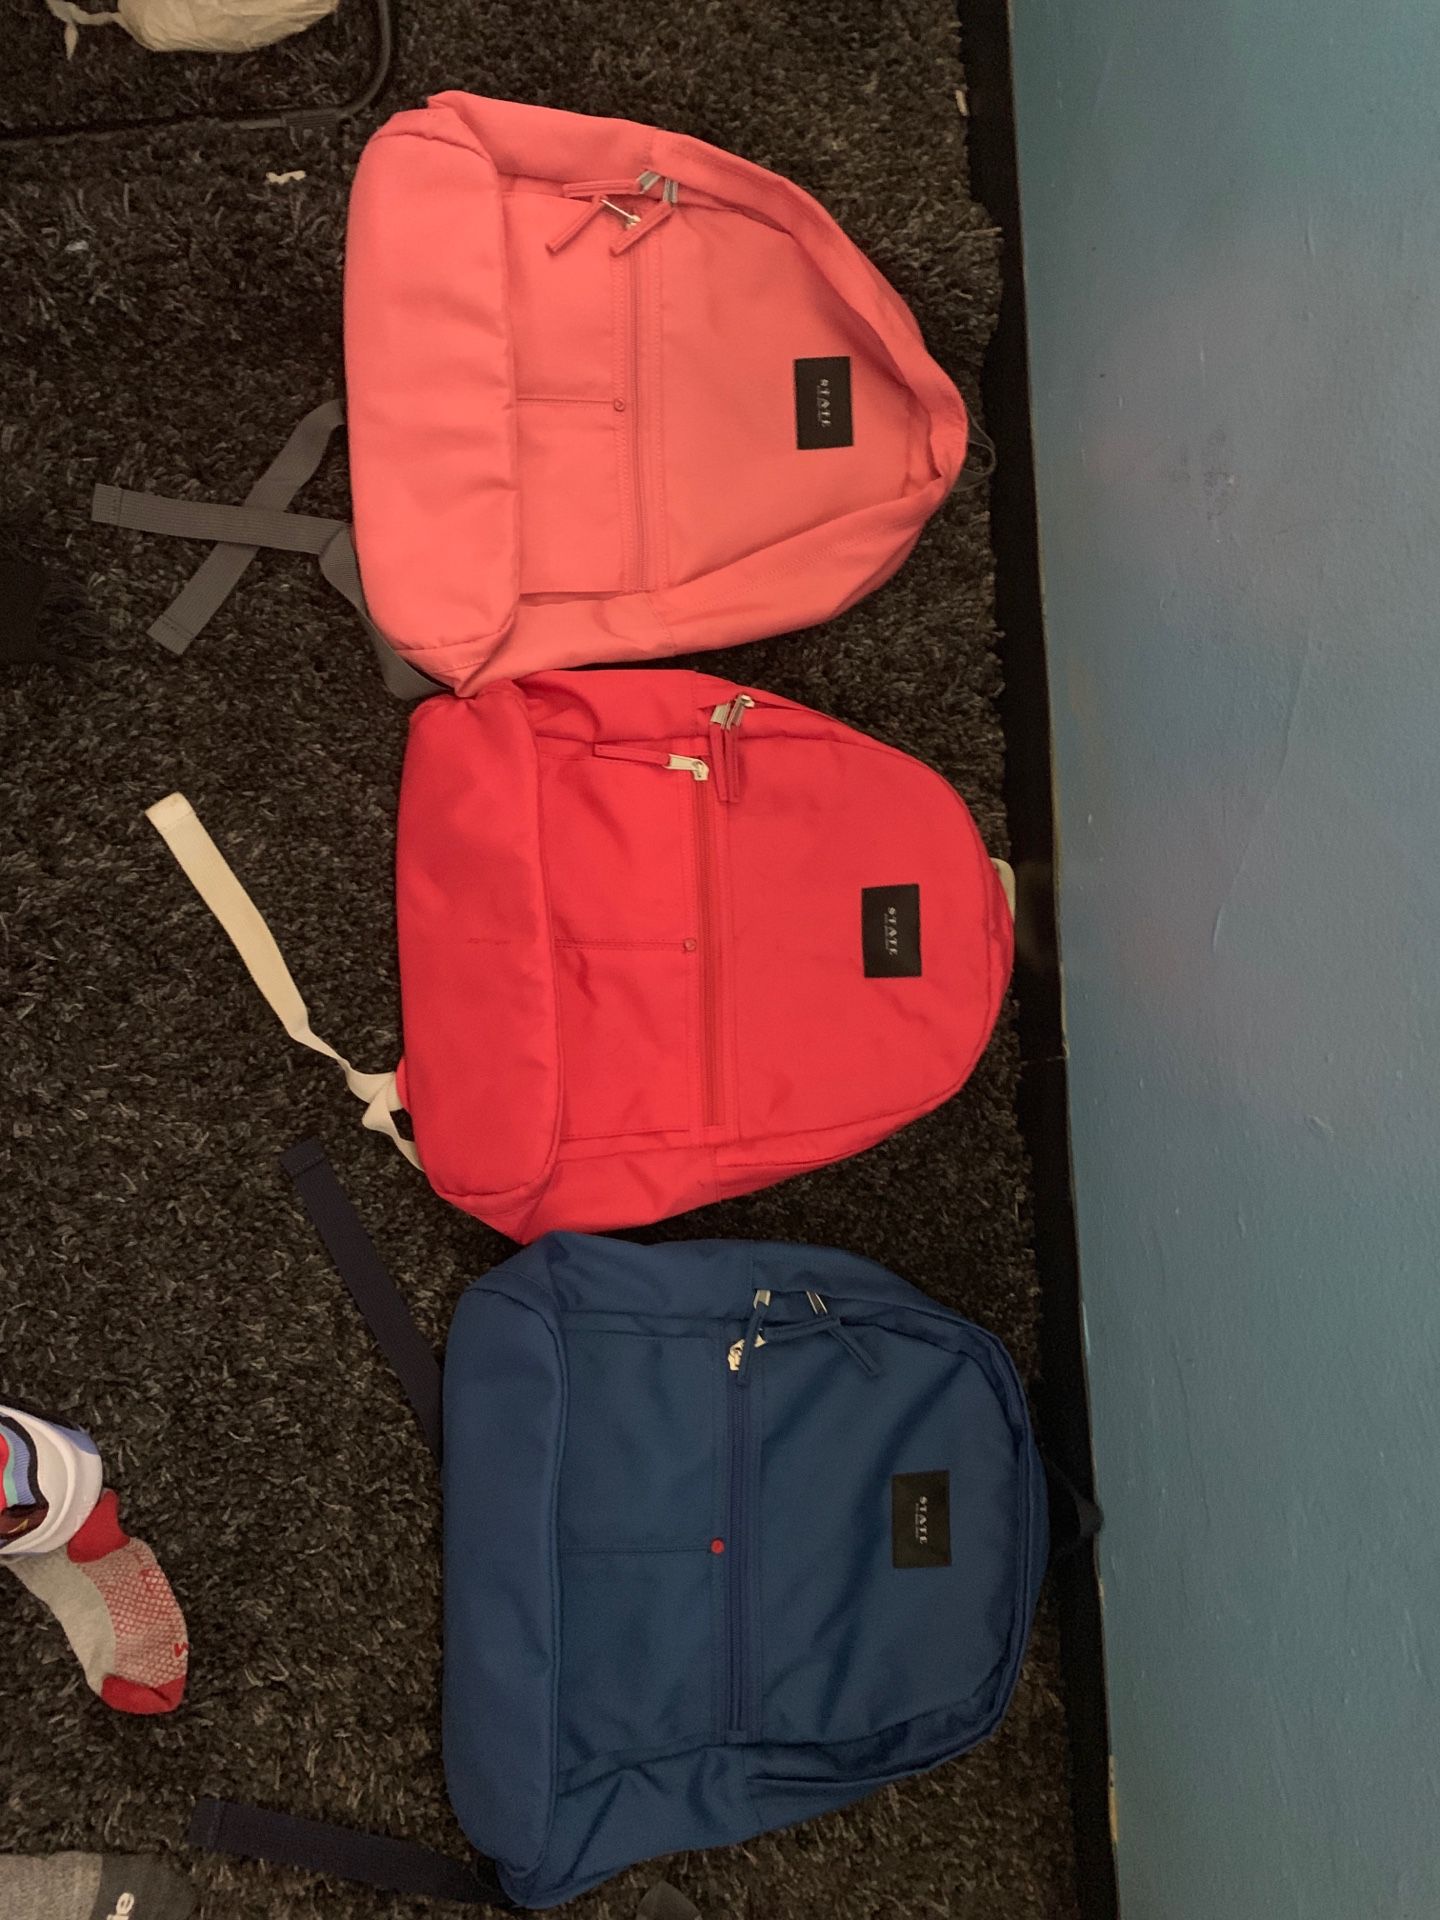 State Bags backpacks brand new